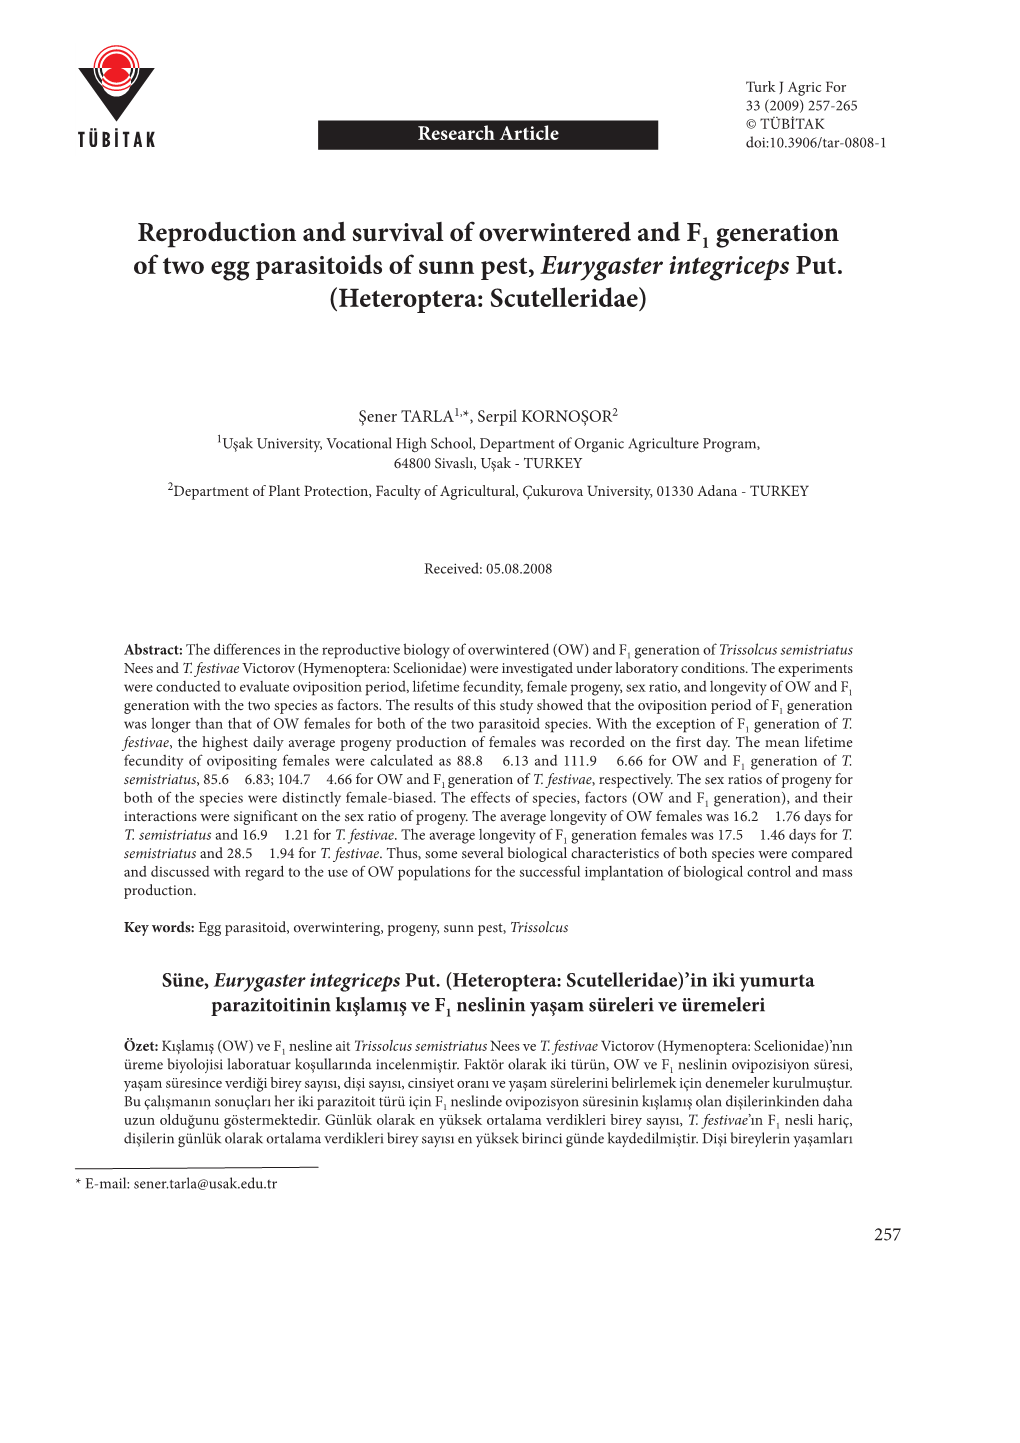 Reproduction and Survival of Overwintered and F1 Generation of Two Egg Parasitoids of Sunn Pest, Eurygaster Integriceps Put